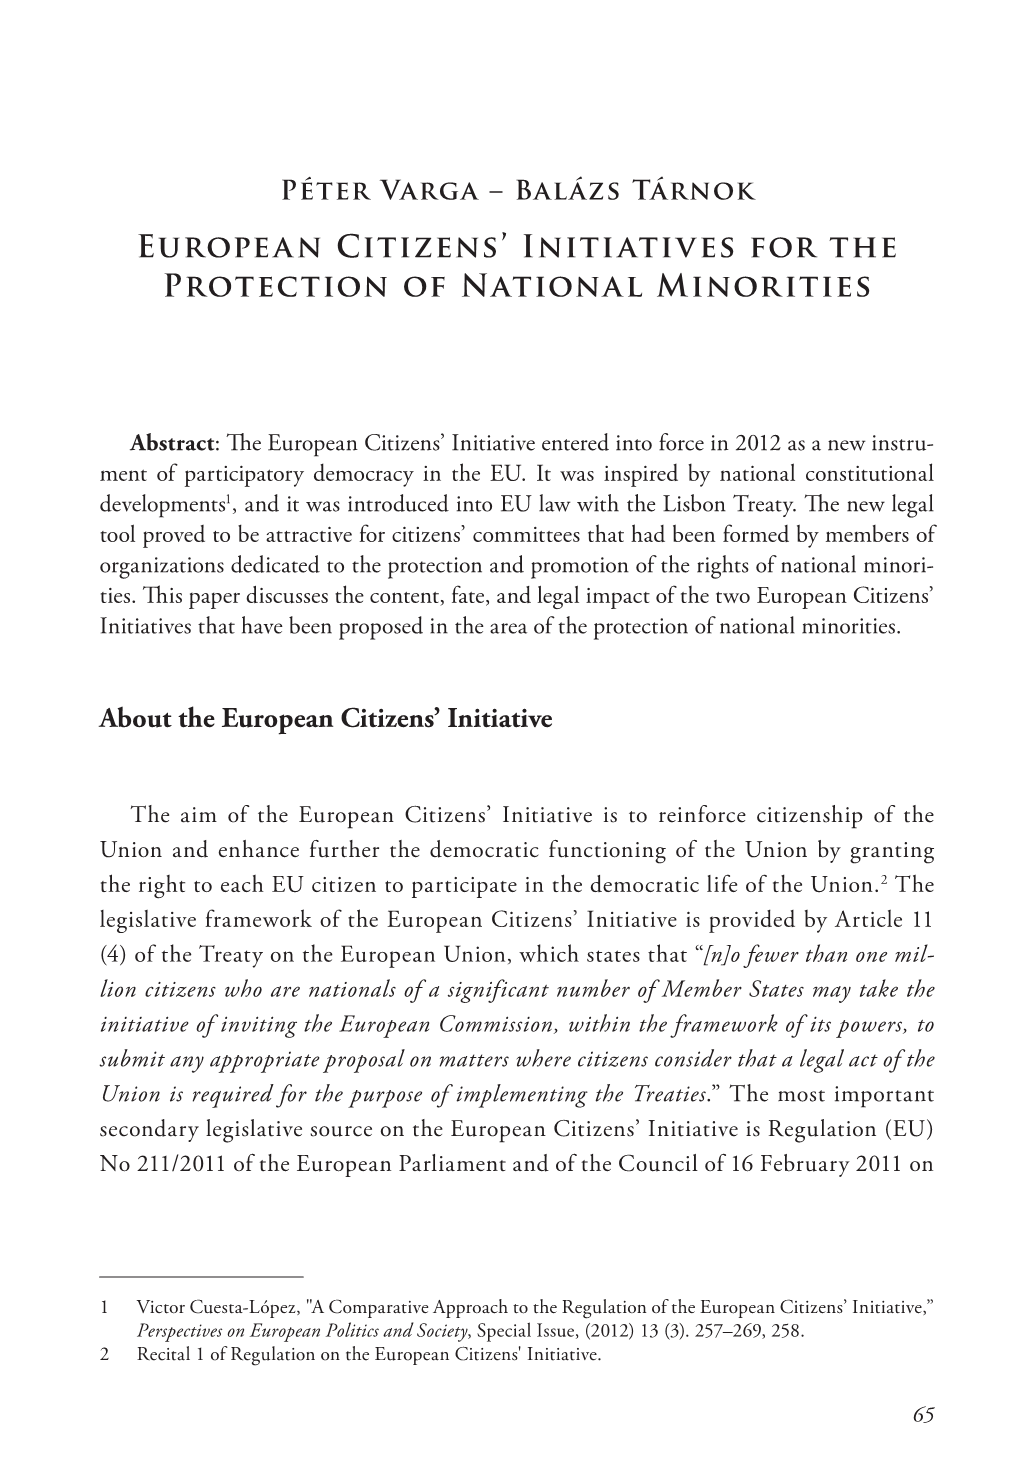 European Citizens' Initiatives for the Protection of National Minorities